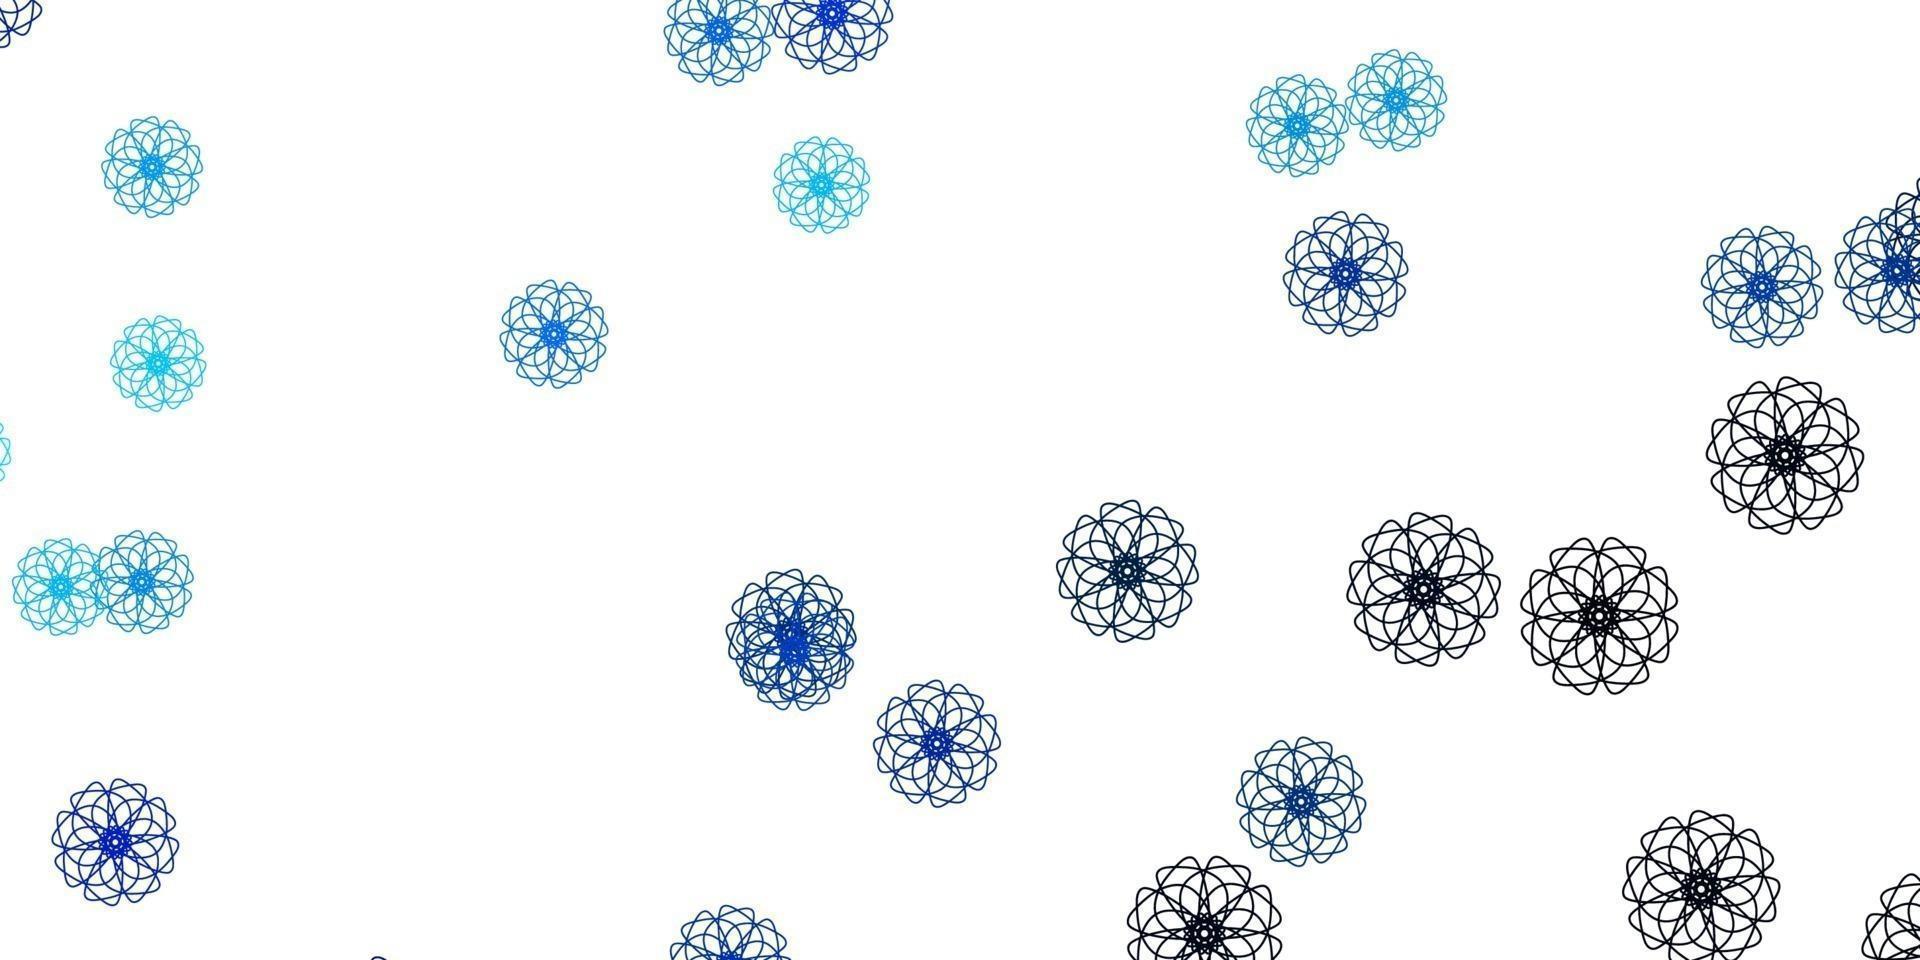 Light BLUE vector natural artwork with flowers.